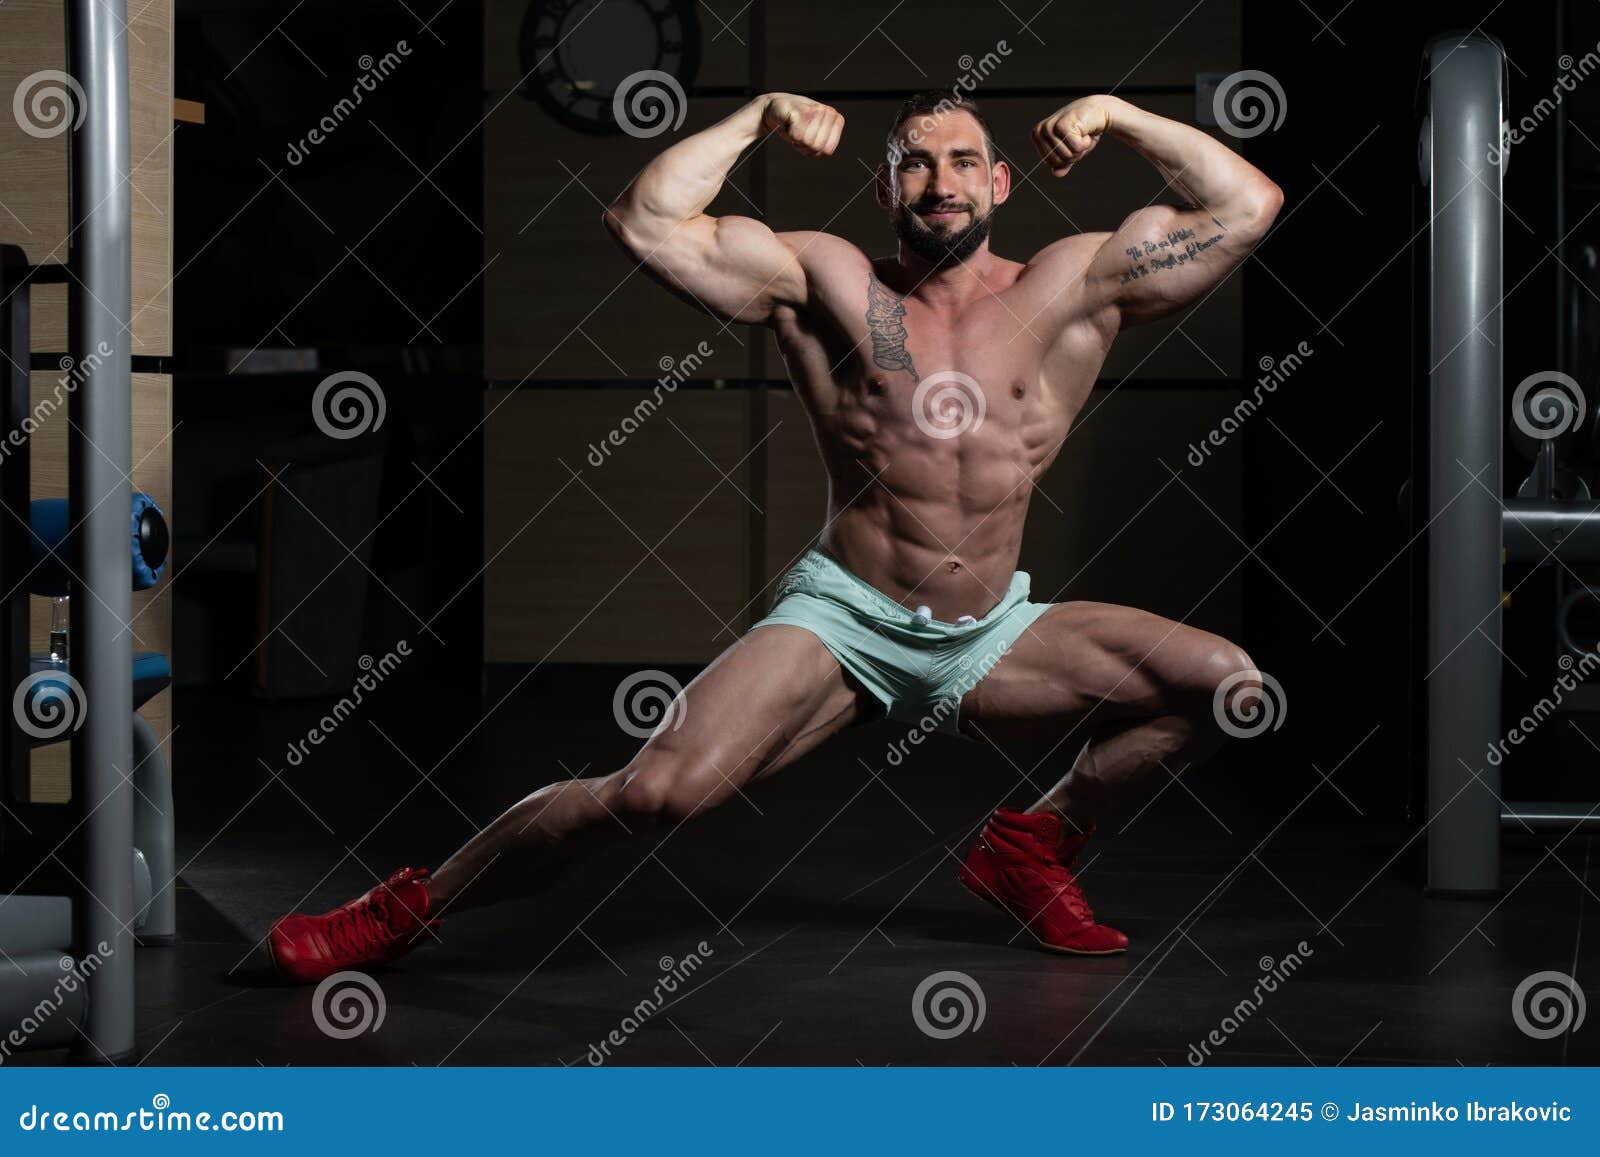 Muscular Men Is Hitting Rear Double Bicep Pose Stock Image Image Of Male Building 173064245